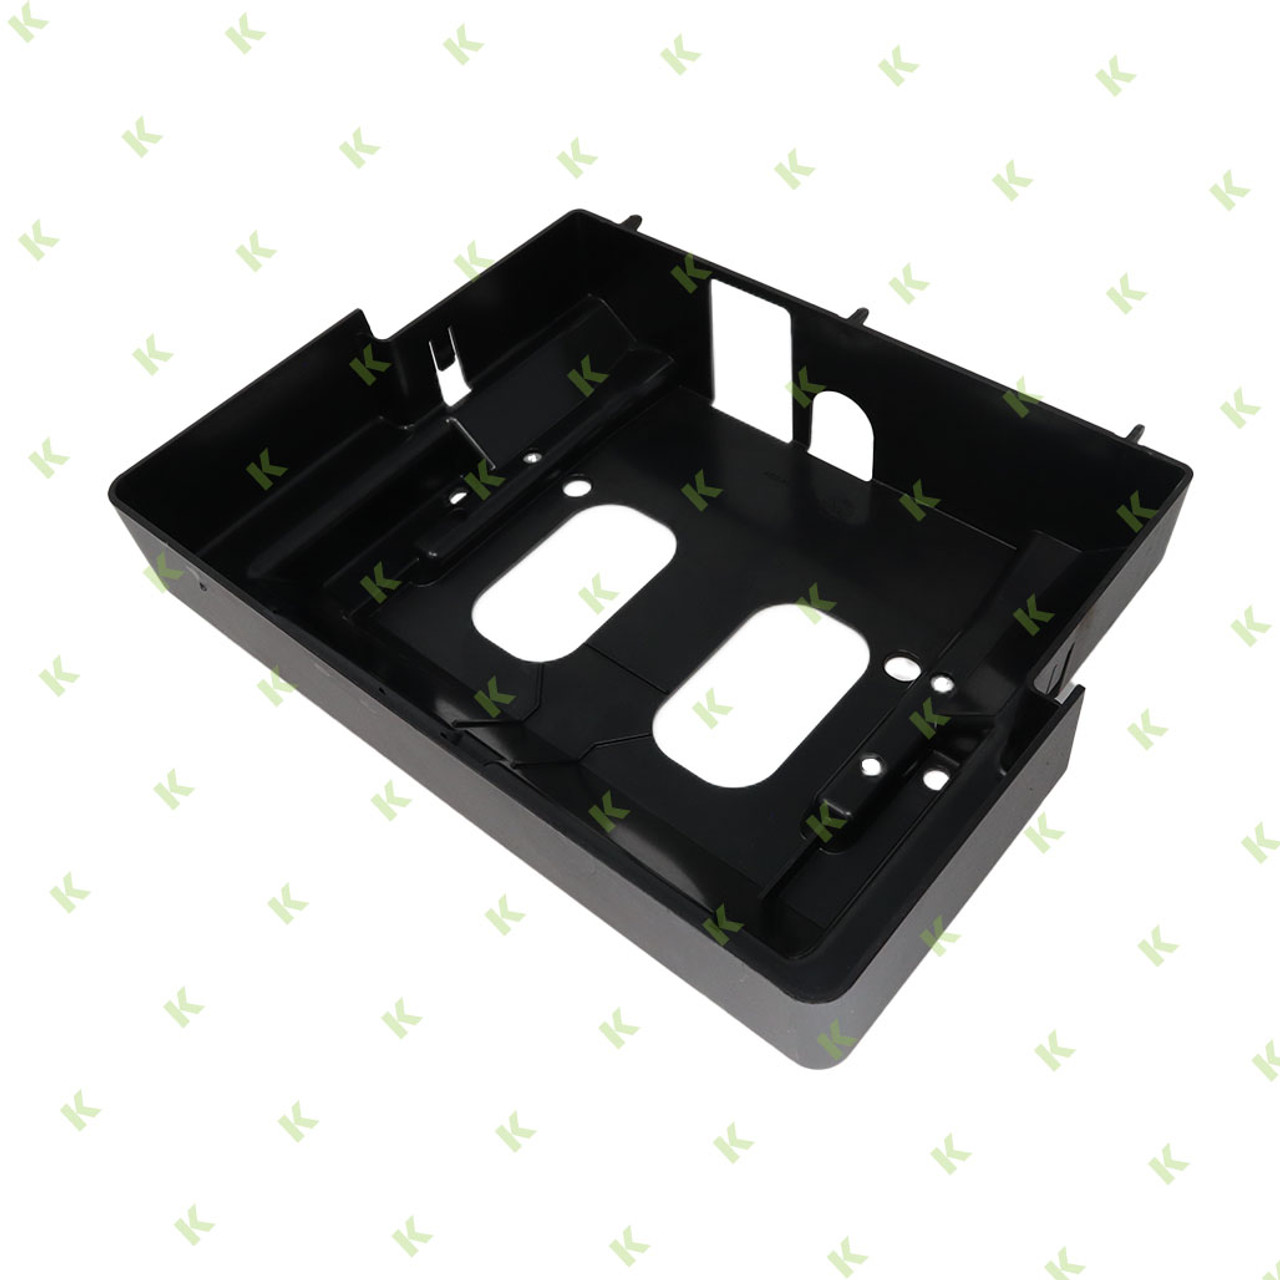 1560135 S700 Drip tray assembled with drain